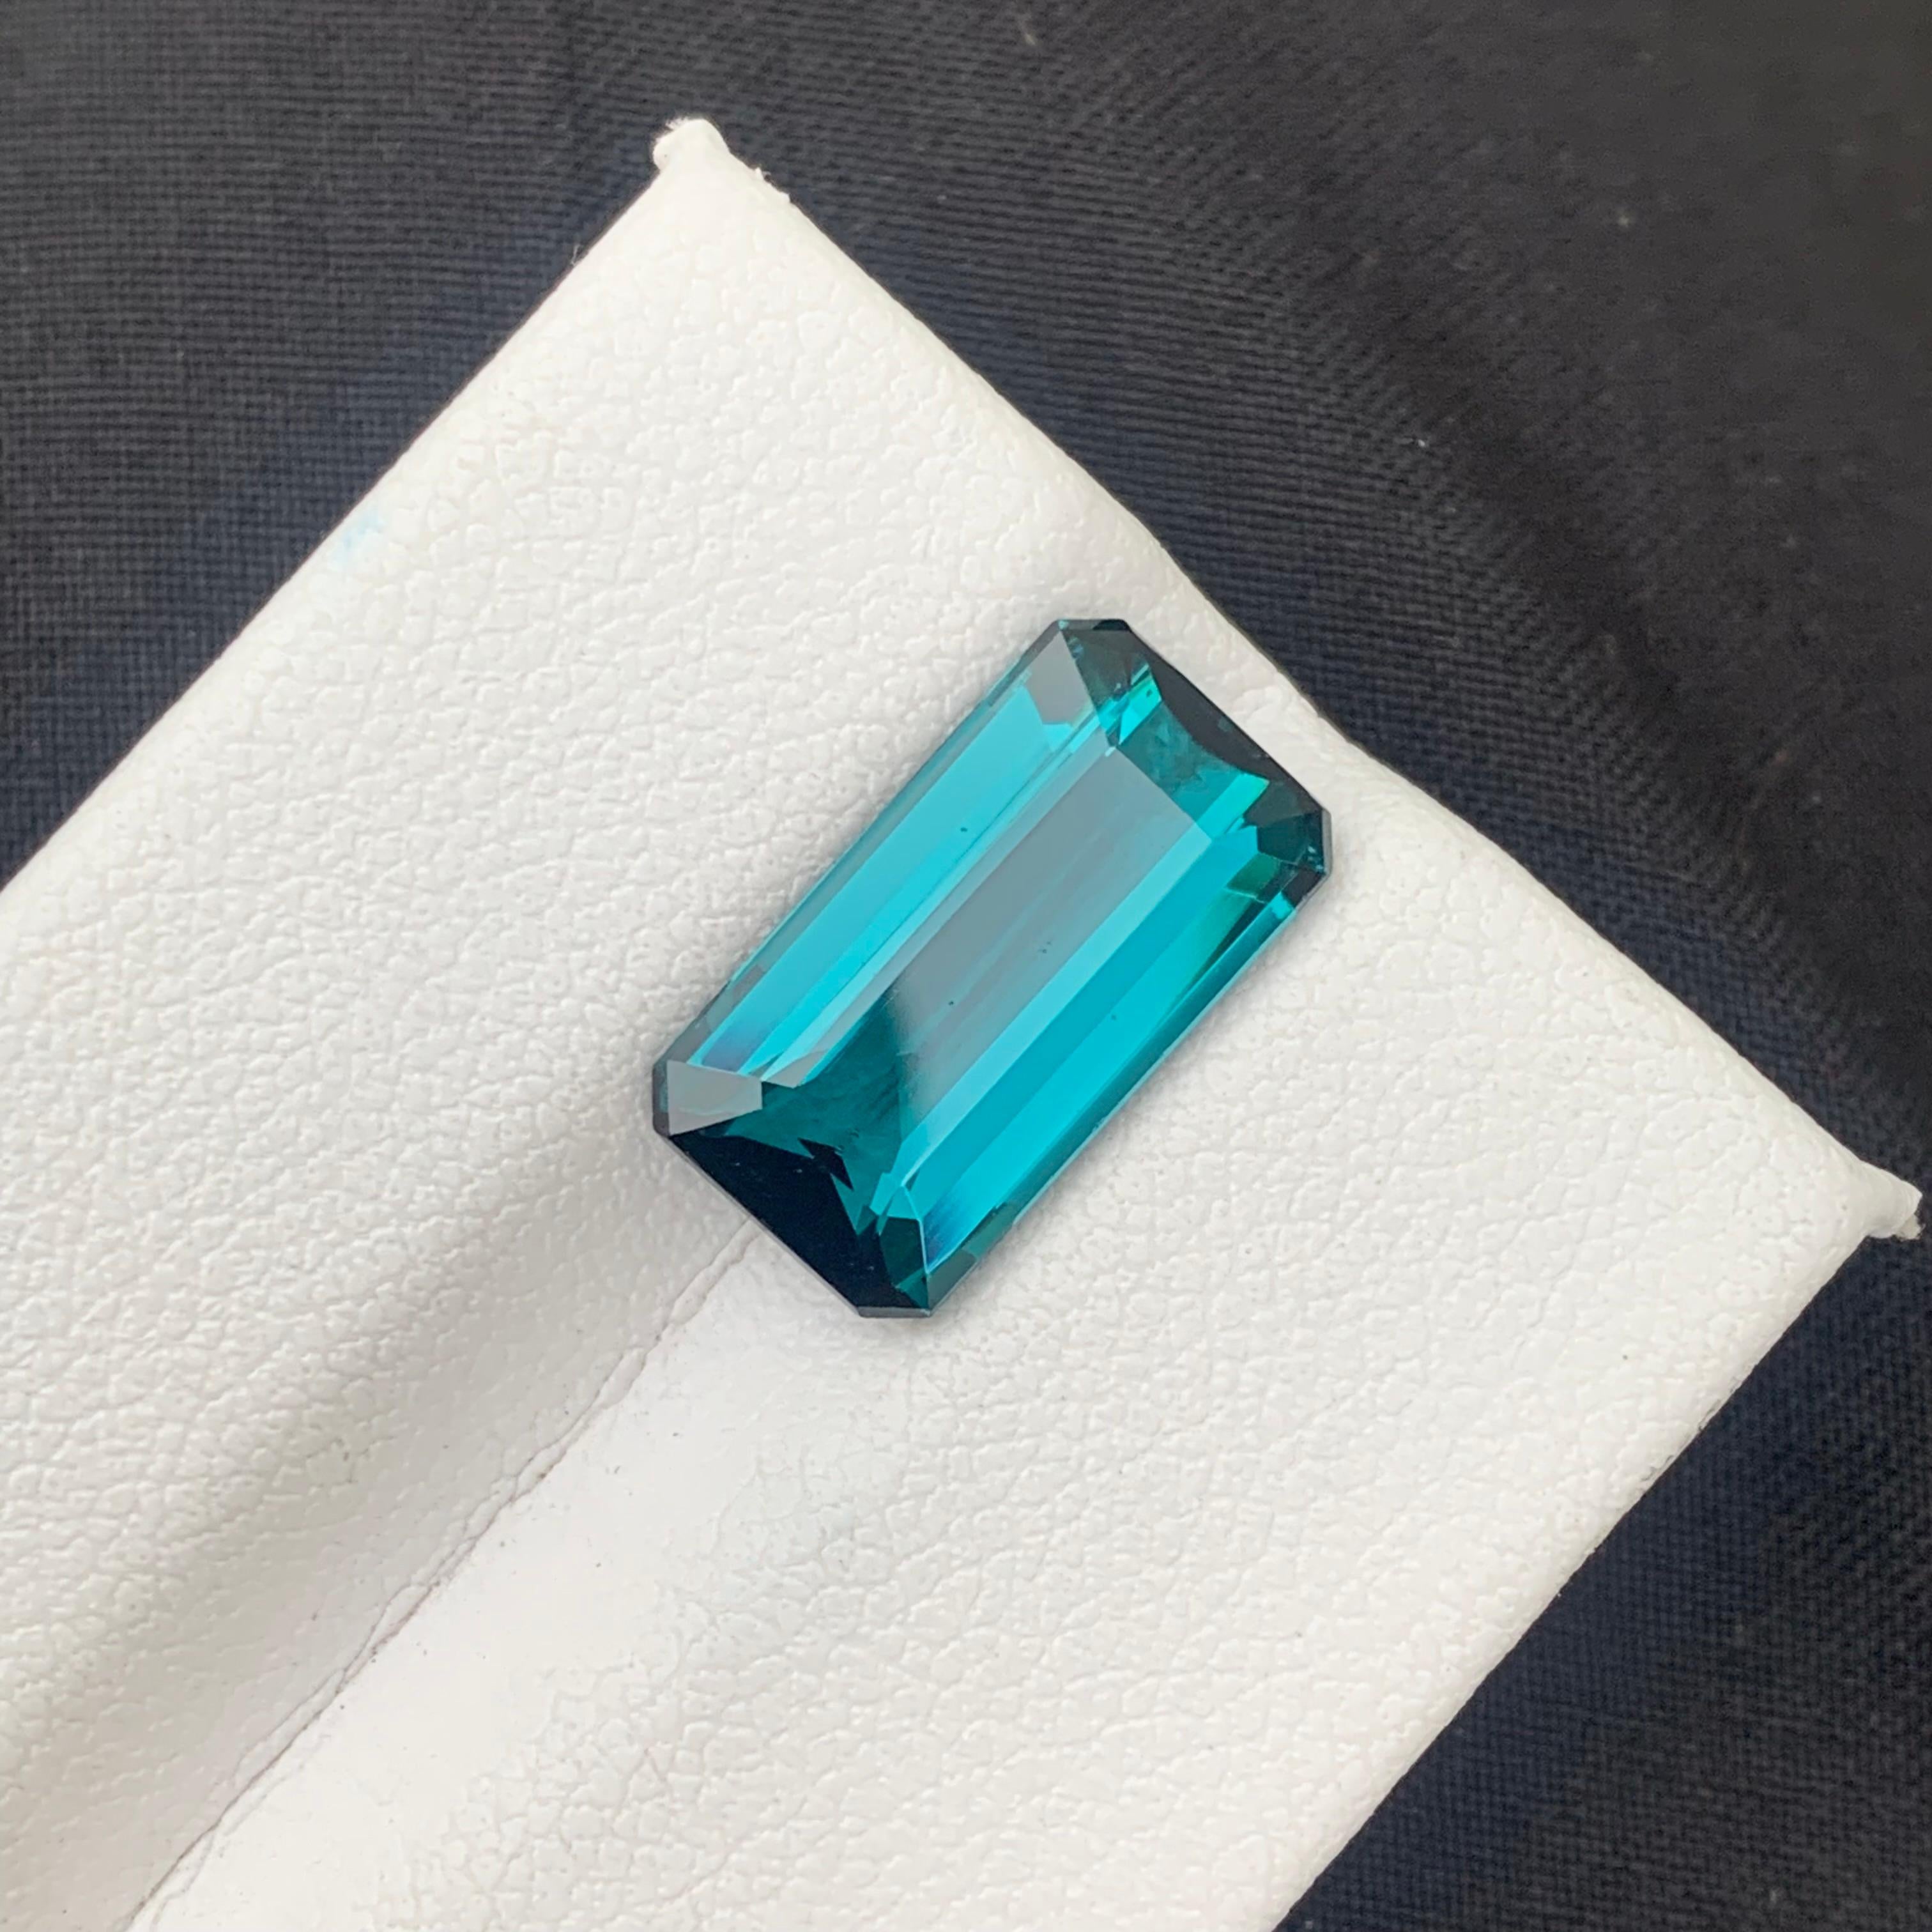 Gorgeous Loose Indicolite Tourmaline
Weight: 5.15 Carats
Dimension: 14.5x7.8x5.1 Mm
Origin; Kunar Afghanistan Mine
Color: Blue
Shape: Emerald
Treatment: Non
Certificate: On Demand
.
Indicolite tourmalines (tourmalines with blue in them) are rare.